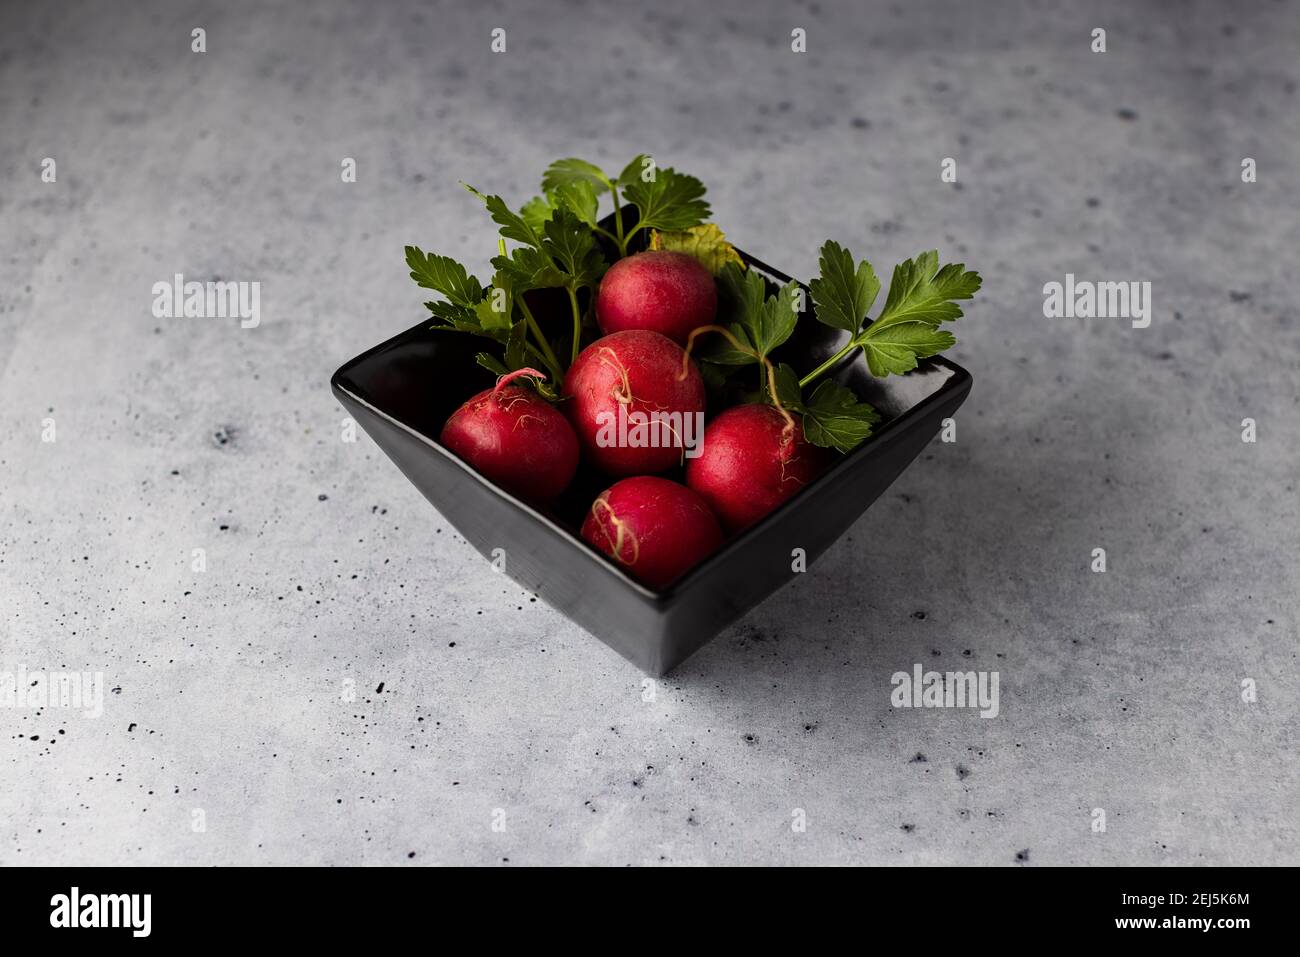 Black bowl of radishes sitting on a cork pad and concrete surface Stock Photo